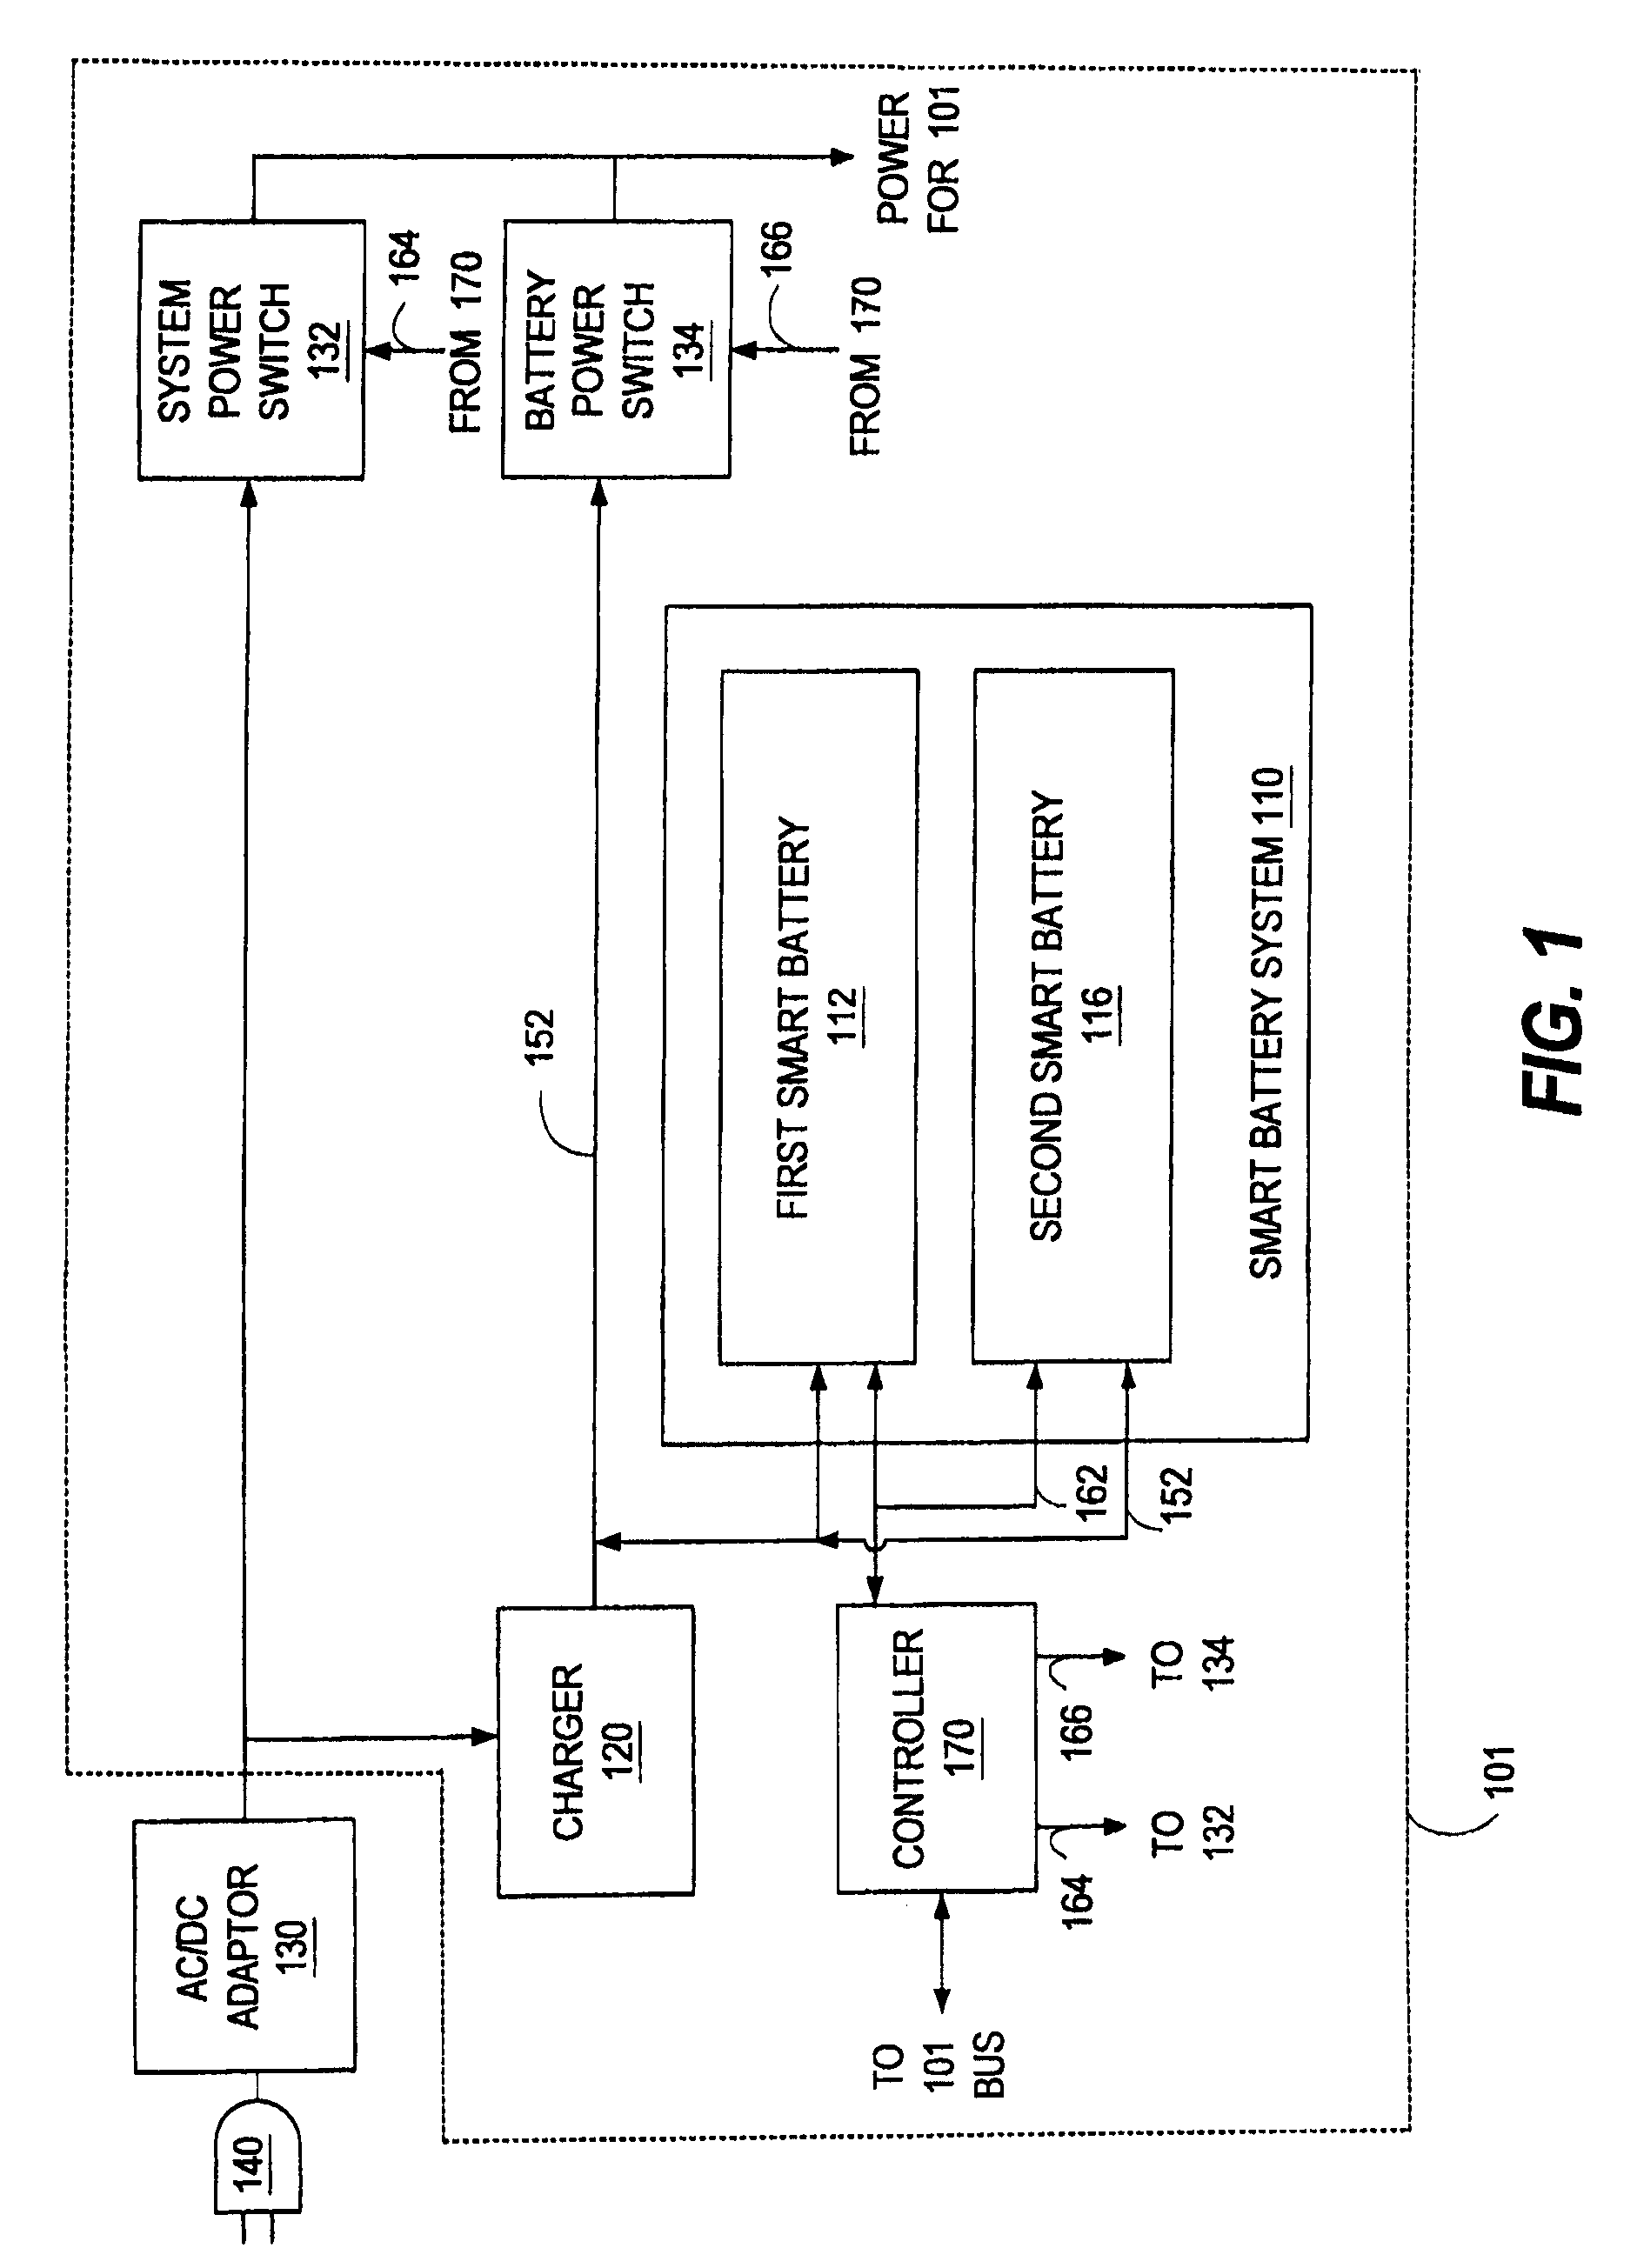 Battery and system power selector integration scheme